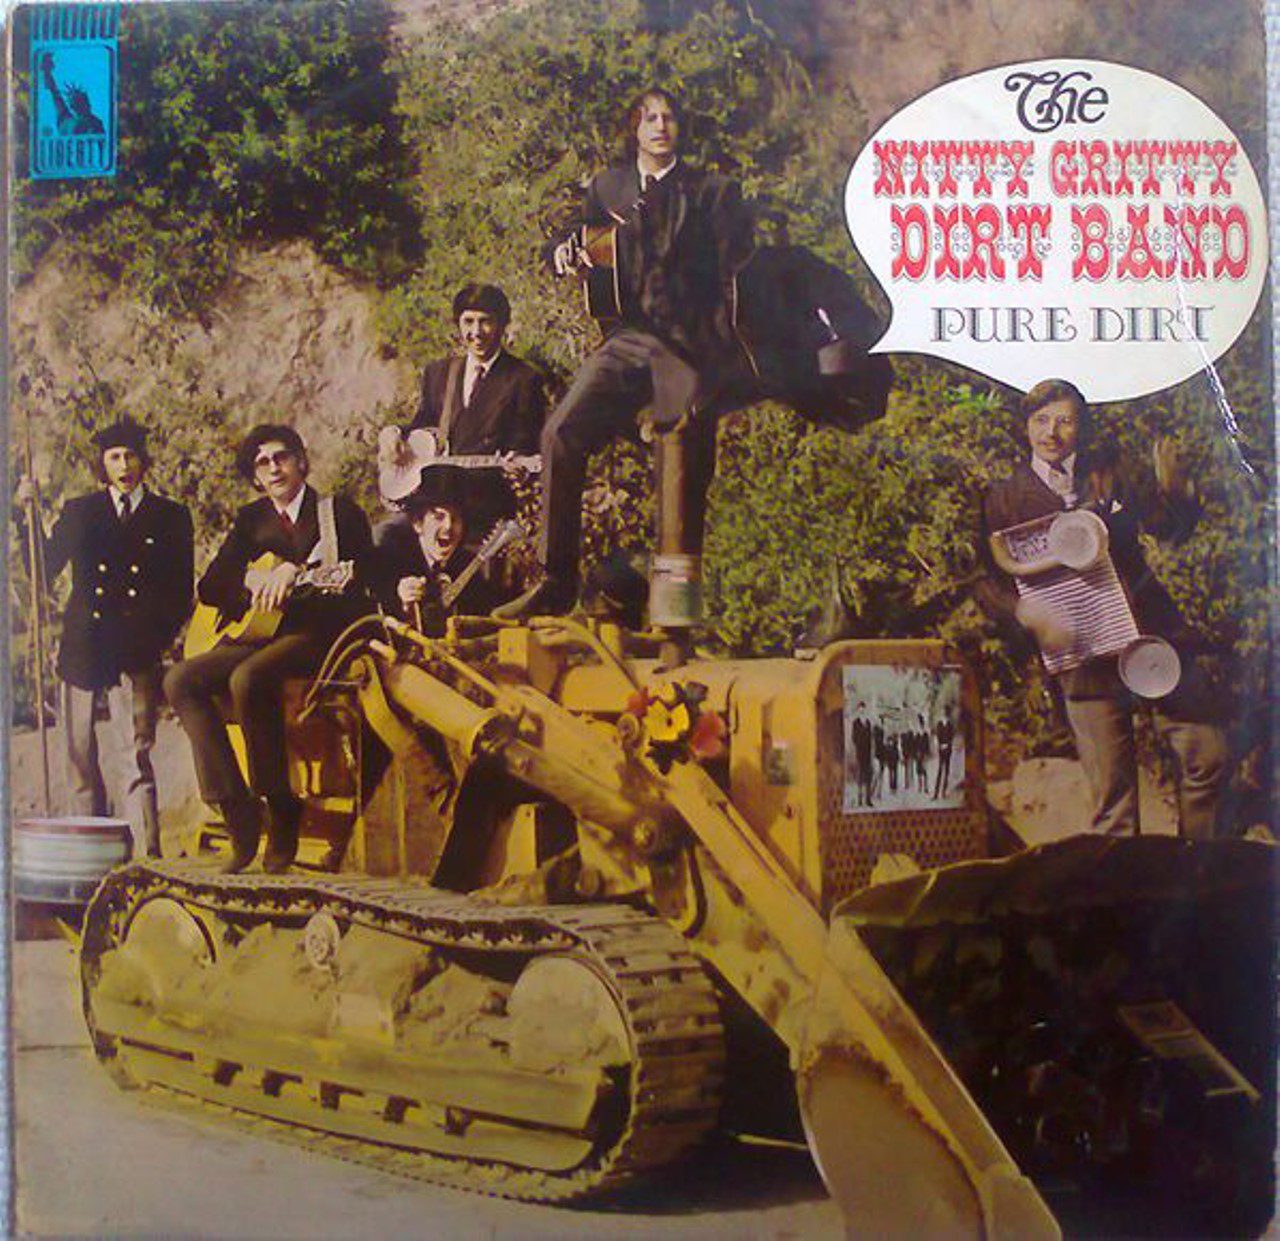 Nitty Gritty Dirt Band – Pure Dirt cover album